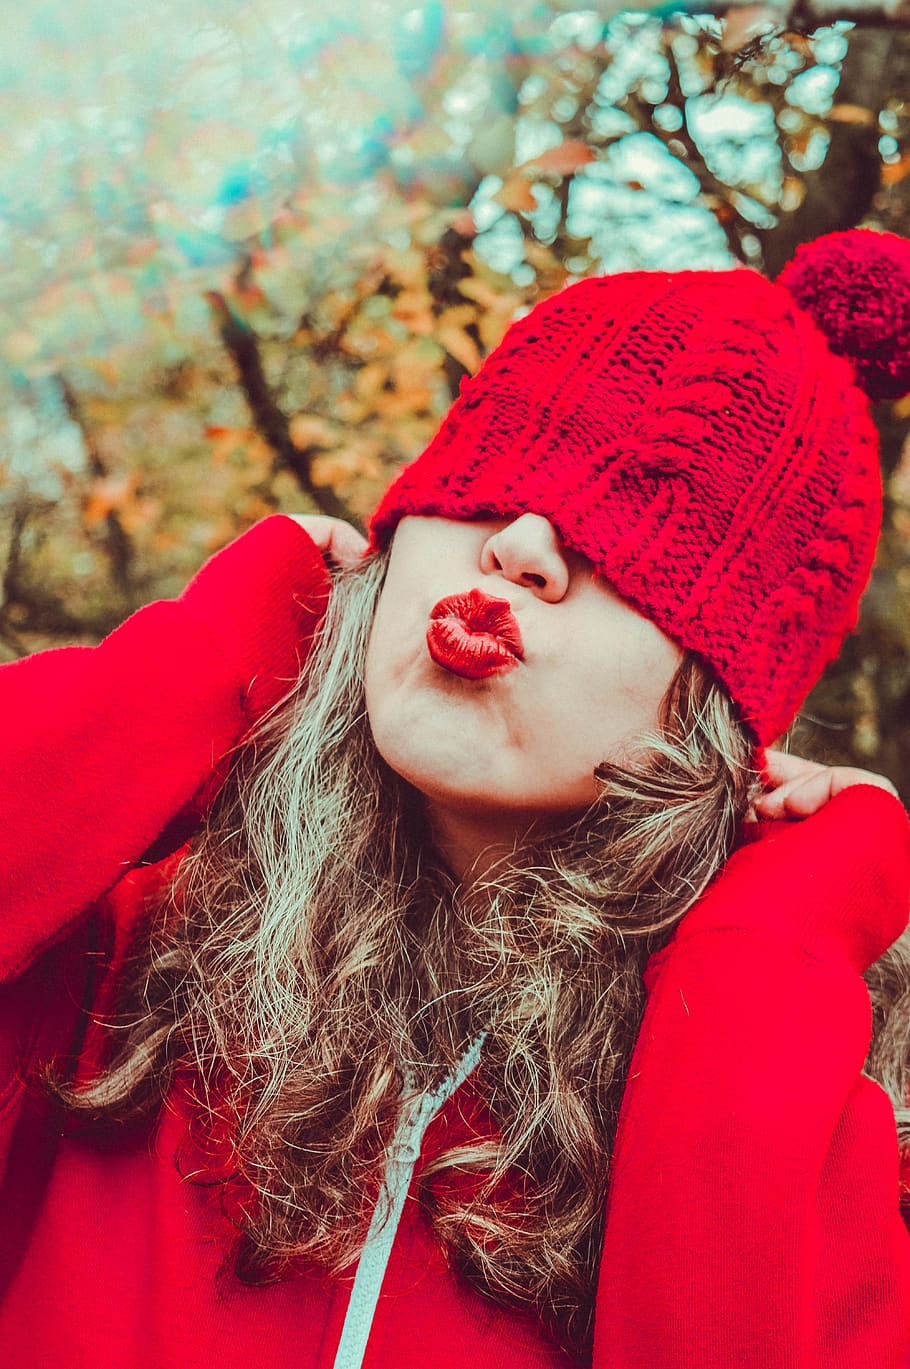 woman, red, hat, kiss, nature, outdoors, pose, funny, silly, portrait